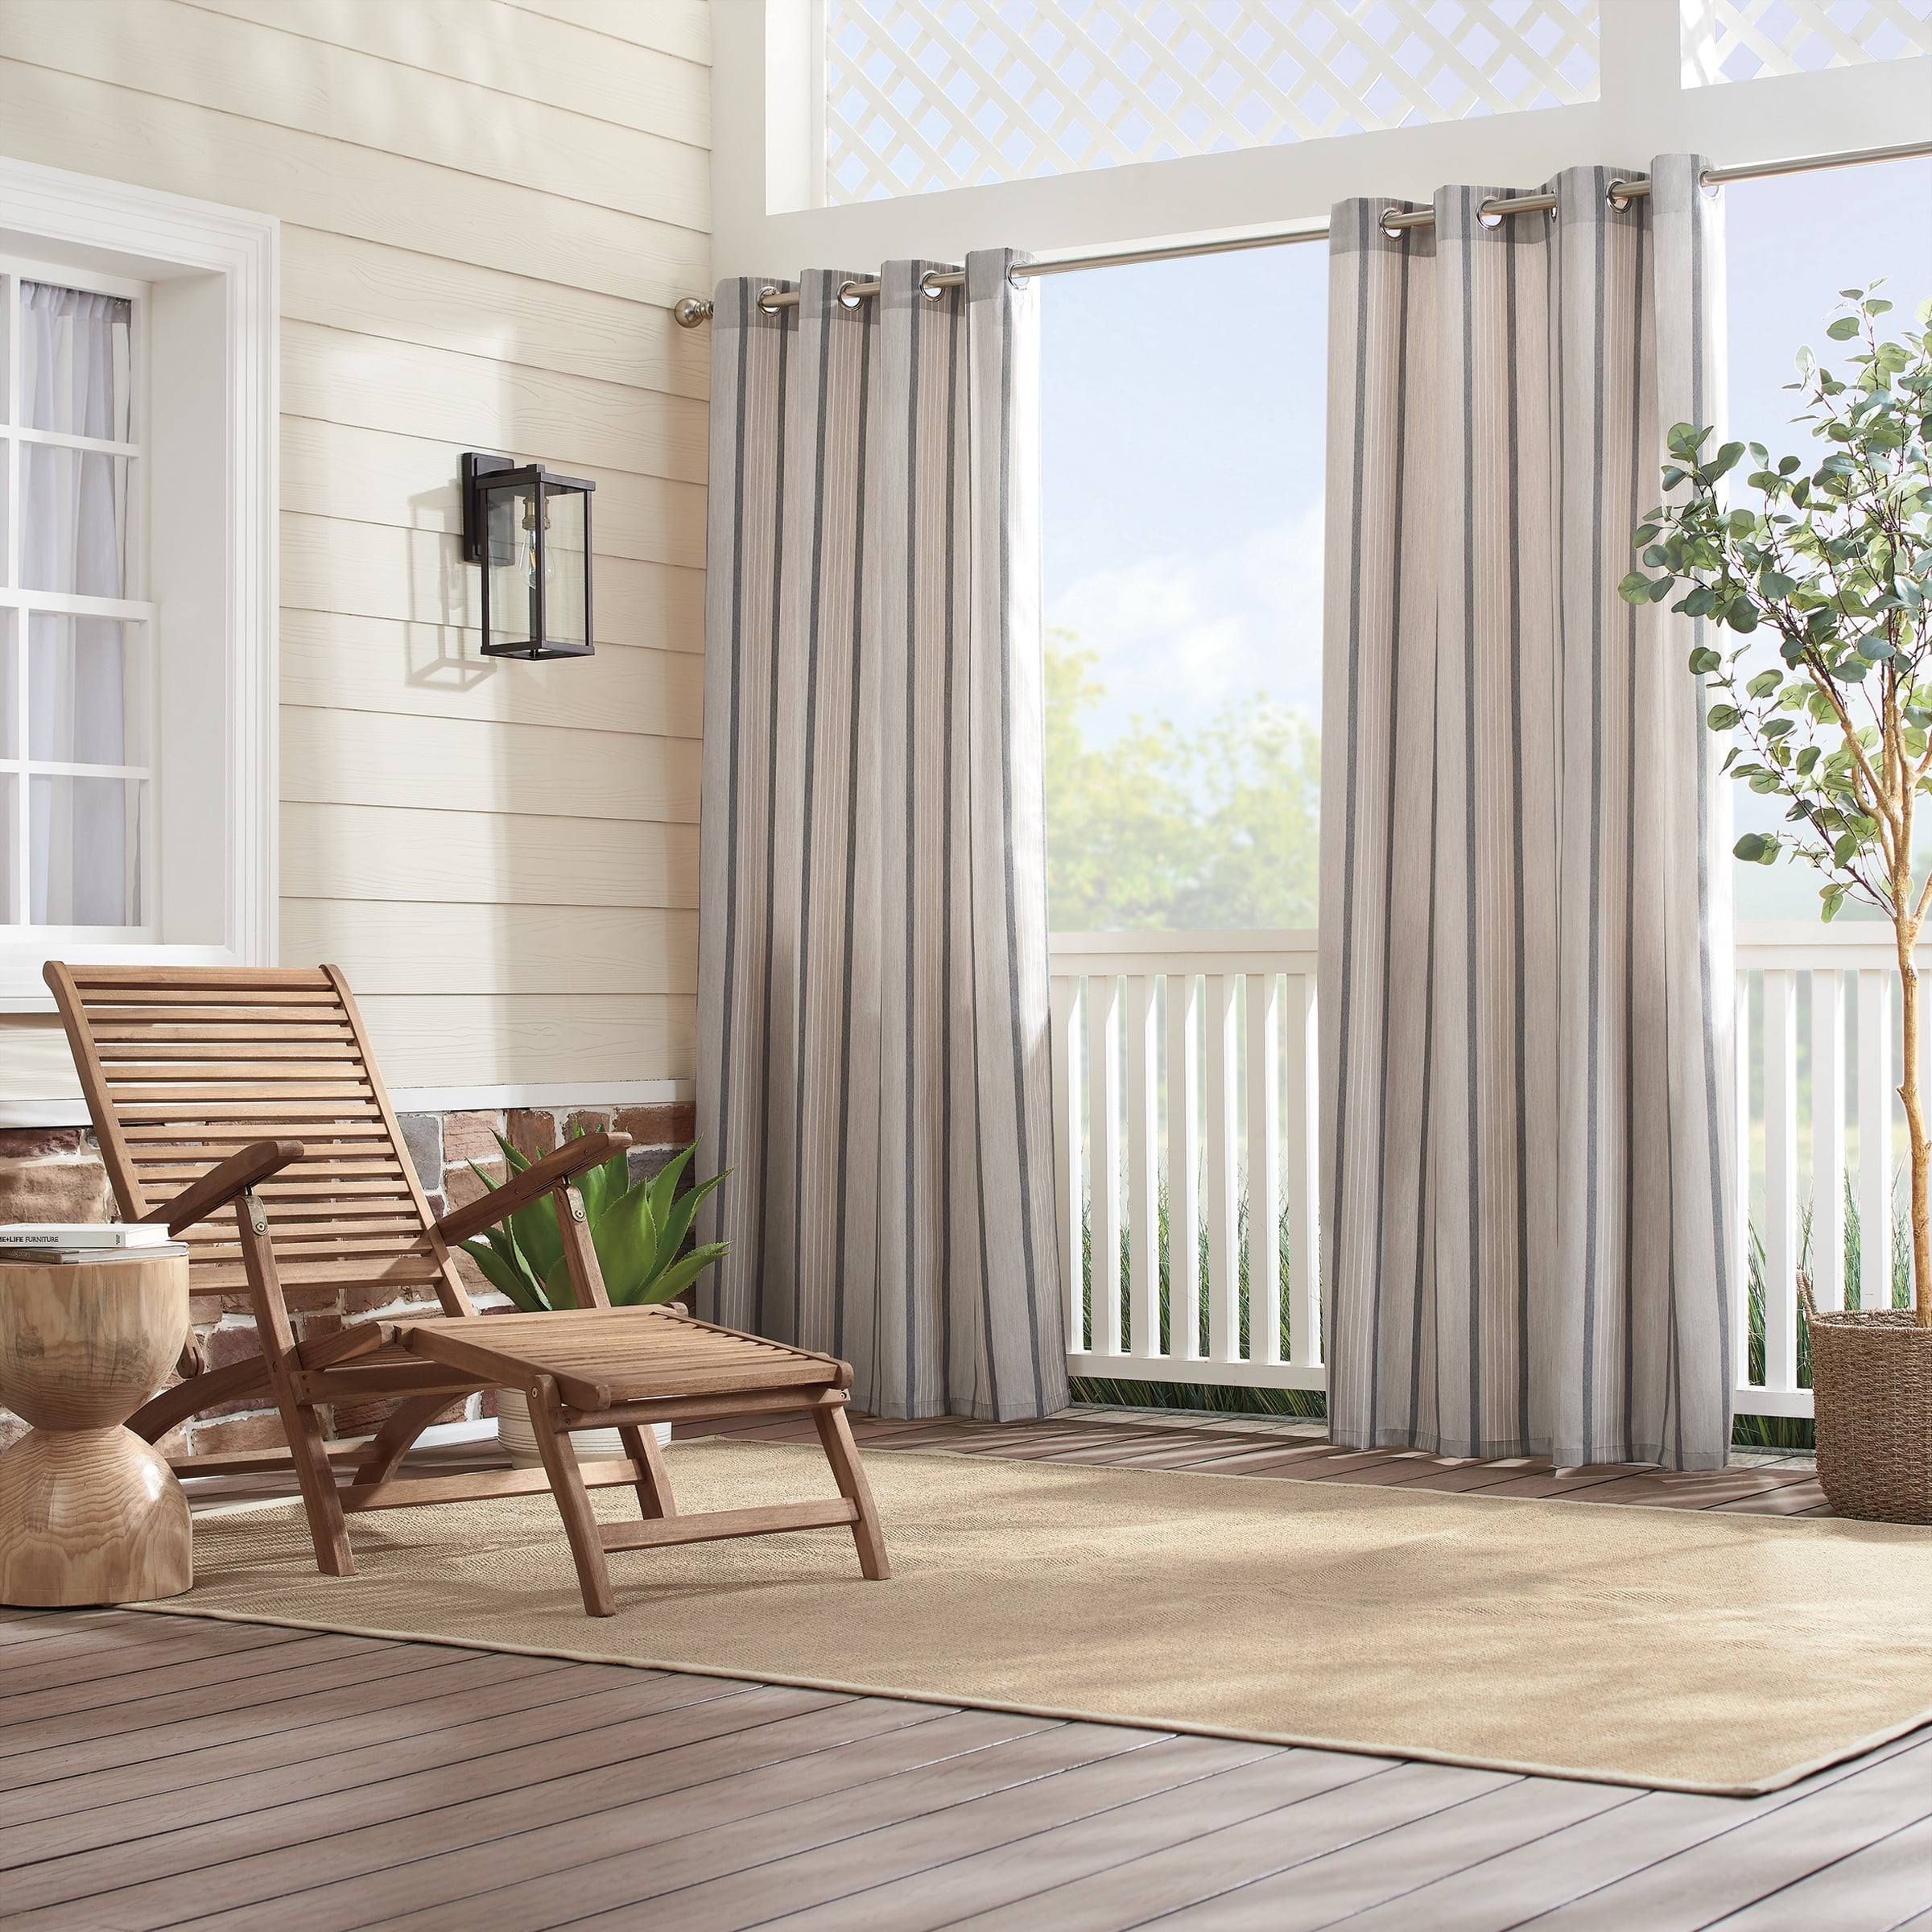 Outdoor Patio Curtains Waterproof with Grommets Outdoor Patio Curtains Outdoor Privacy Porch Curtains Outdoor Curtain for Patio Patio Curtains RHF Outdoor Blackout Curtains Tan-52by108 2Pieces 